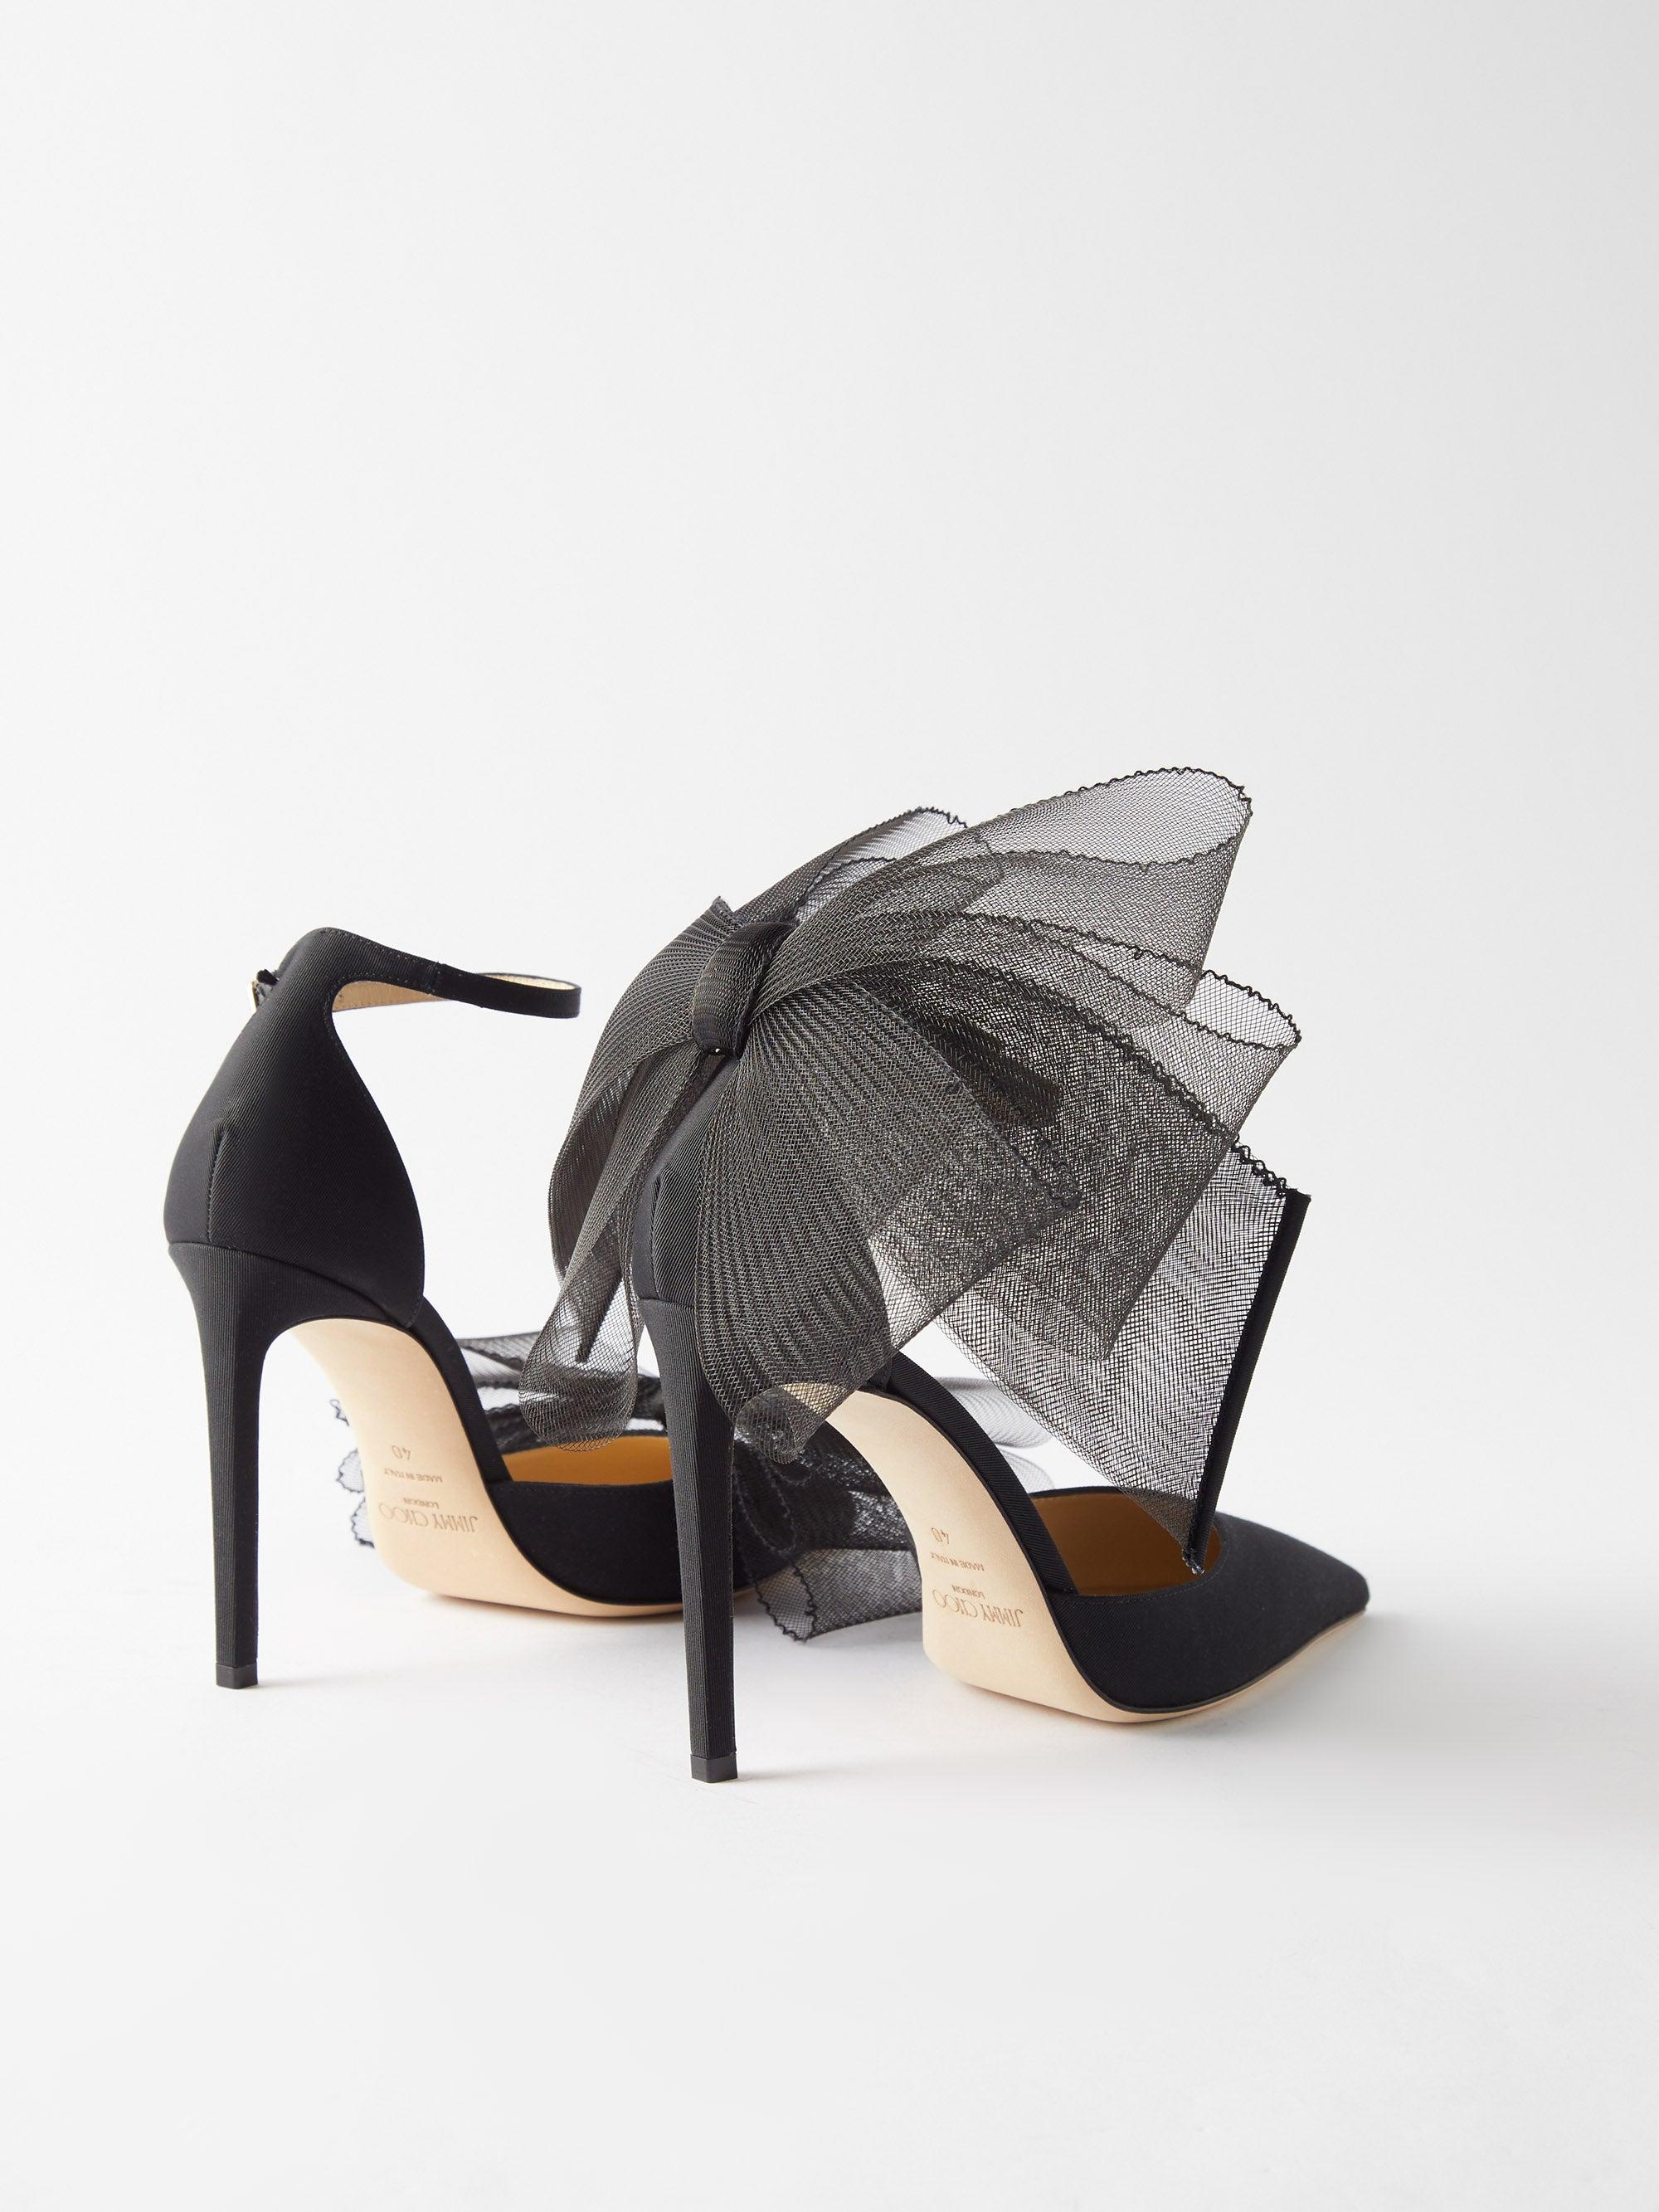 Jimmy Choo Averly 100 Bow-trim Leather Pumps in Black | Lyst